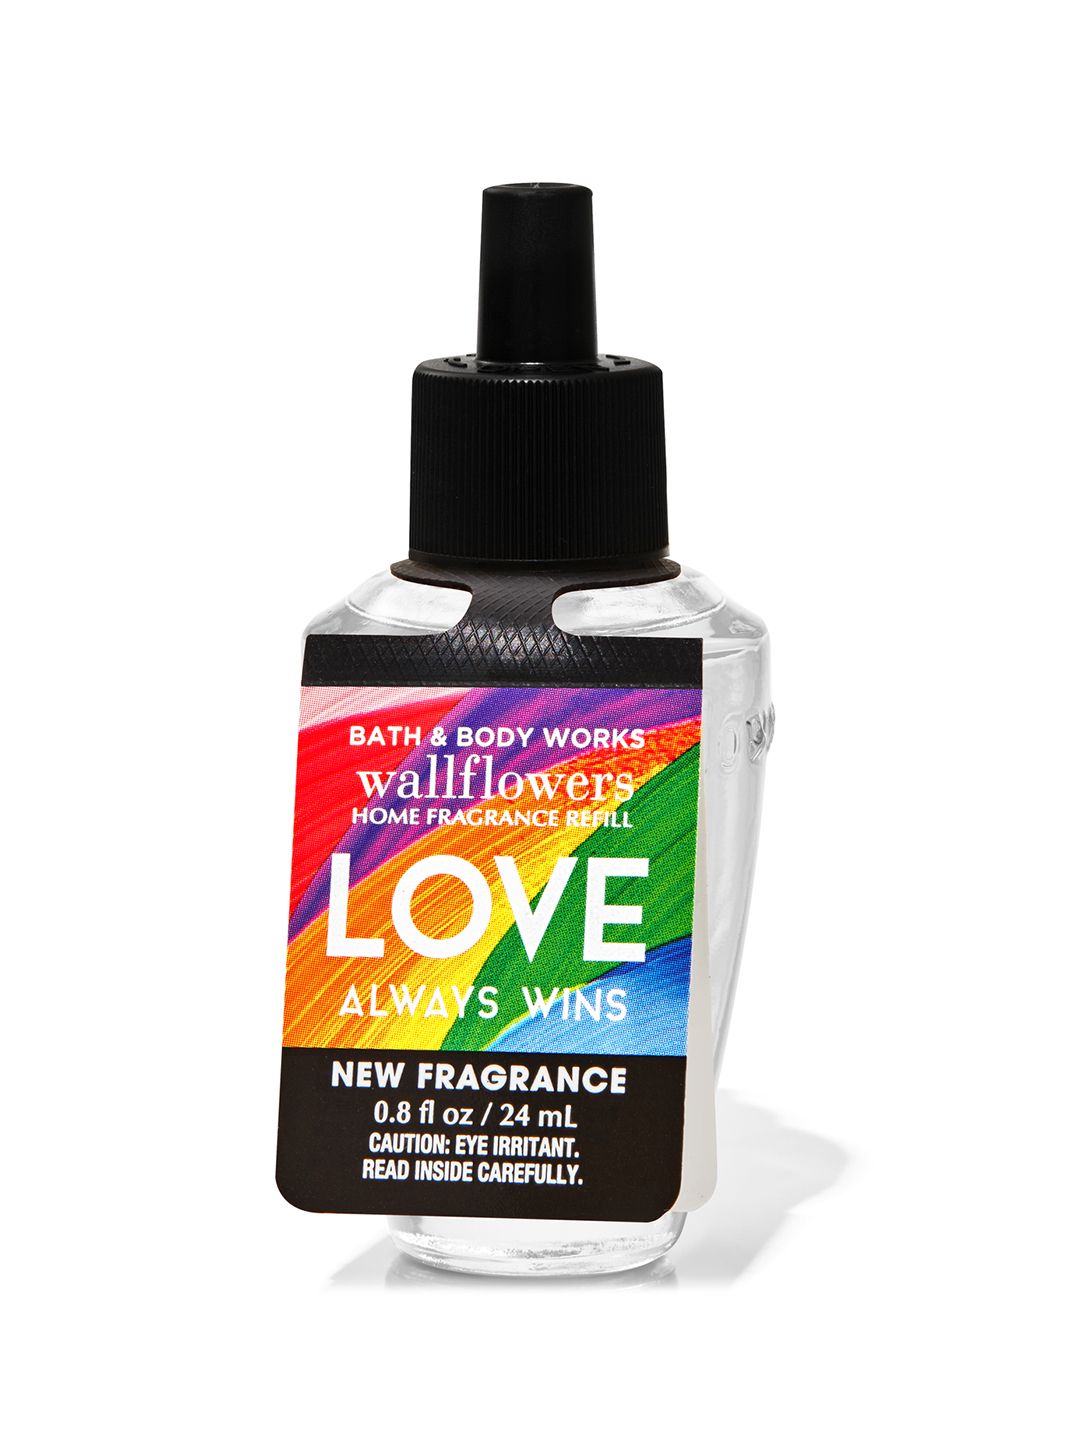 Bath & Body Works Love Always Wins Wallflowers Home Fragrance Refill - 24 ml Price in India